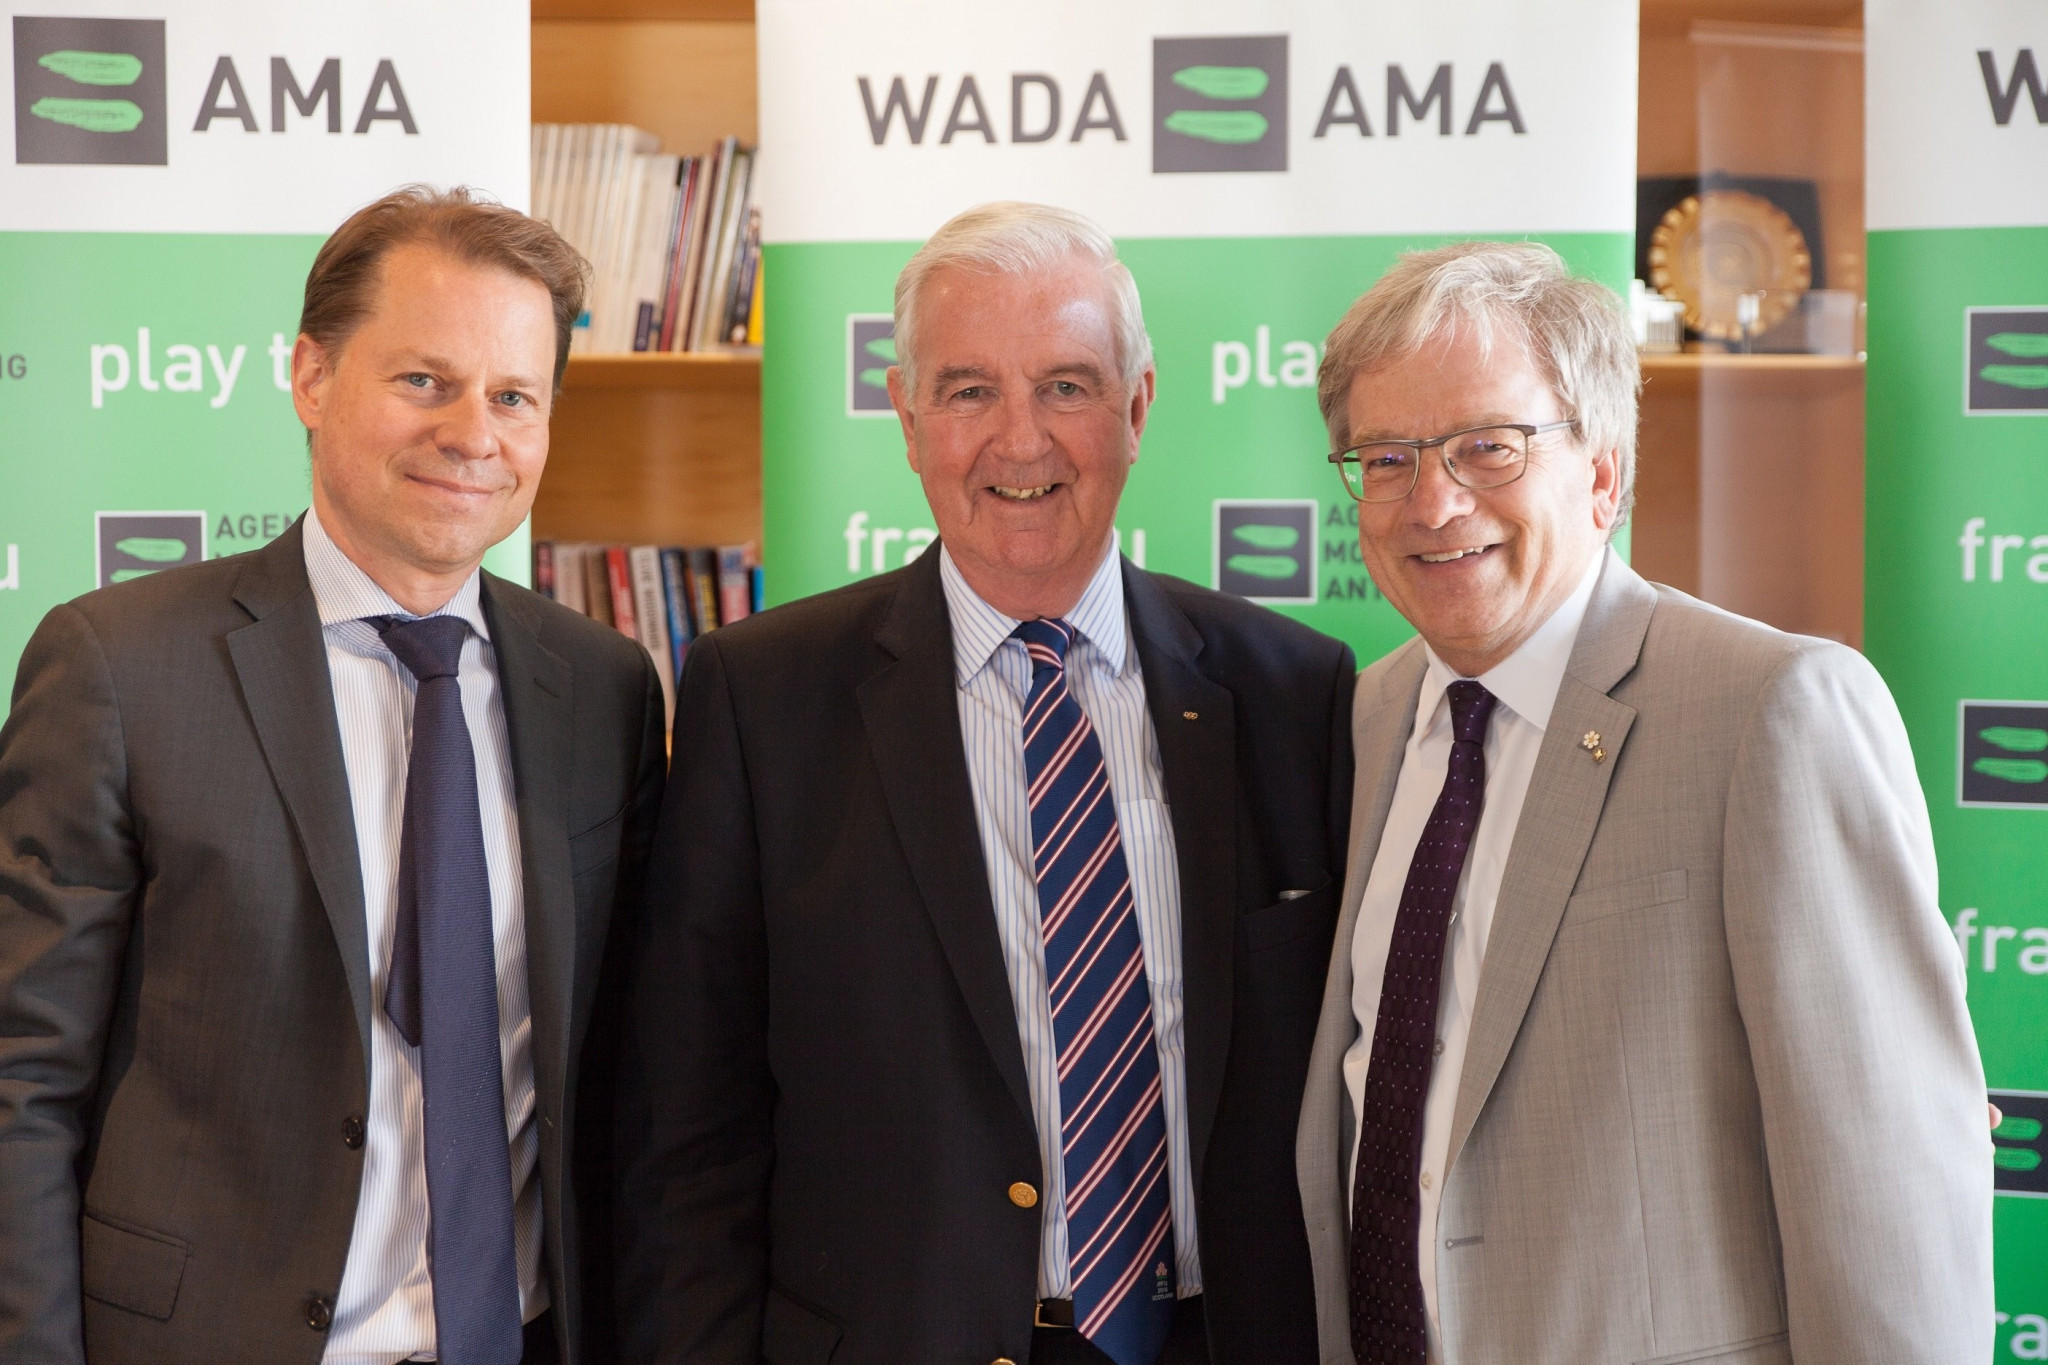 It is hoped the MoU will help identify new doping trends, new substances, new means of administration and new detection methods ©WADA